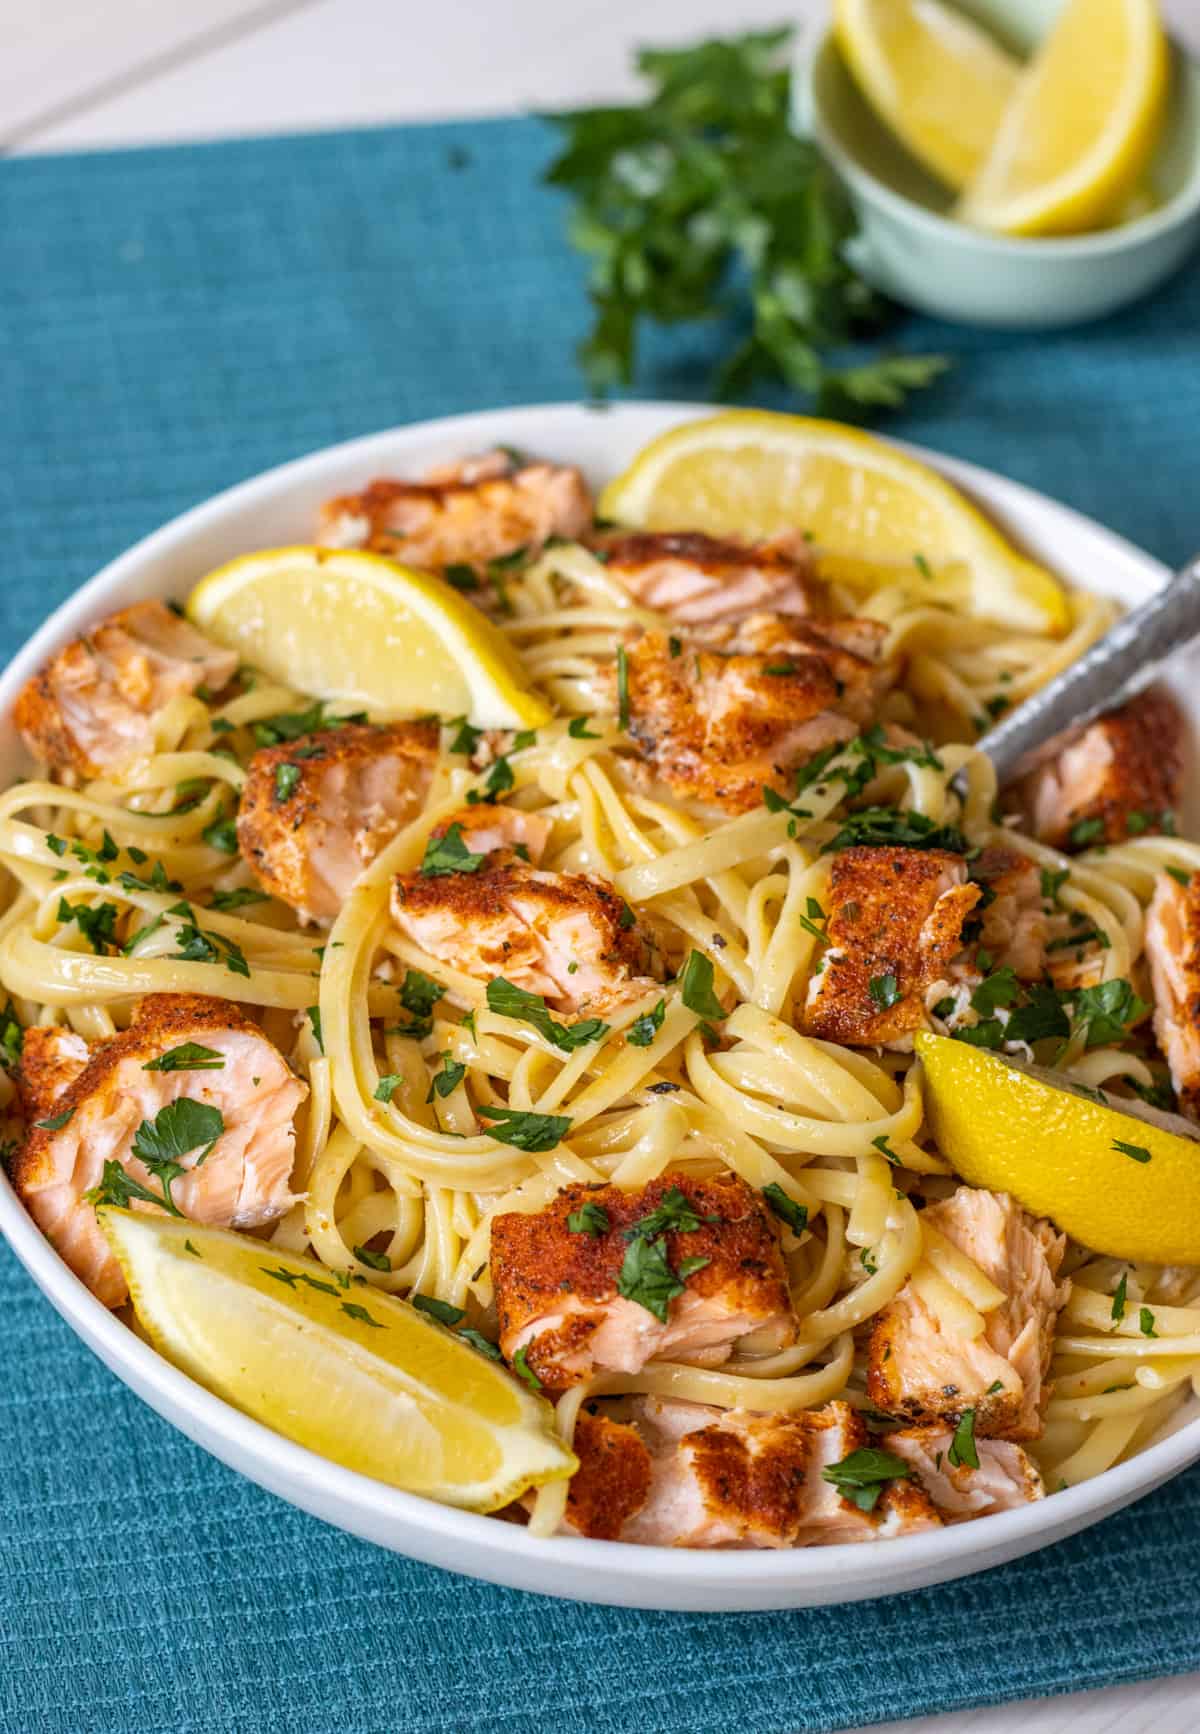 Linguine topped with chunks of salmon, lemon wedges, and parsley with extra parsley and lemons in the background.